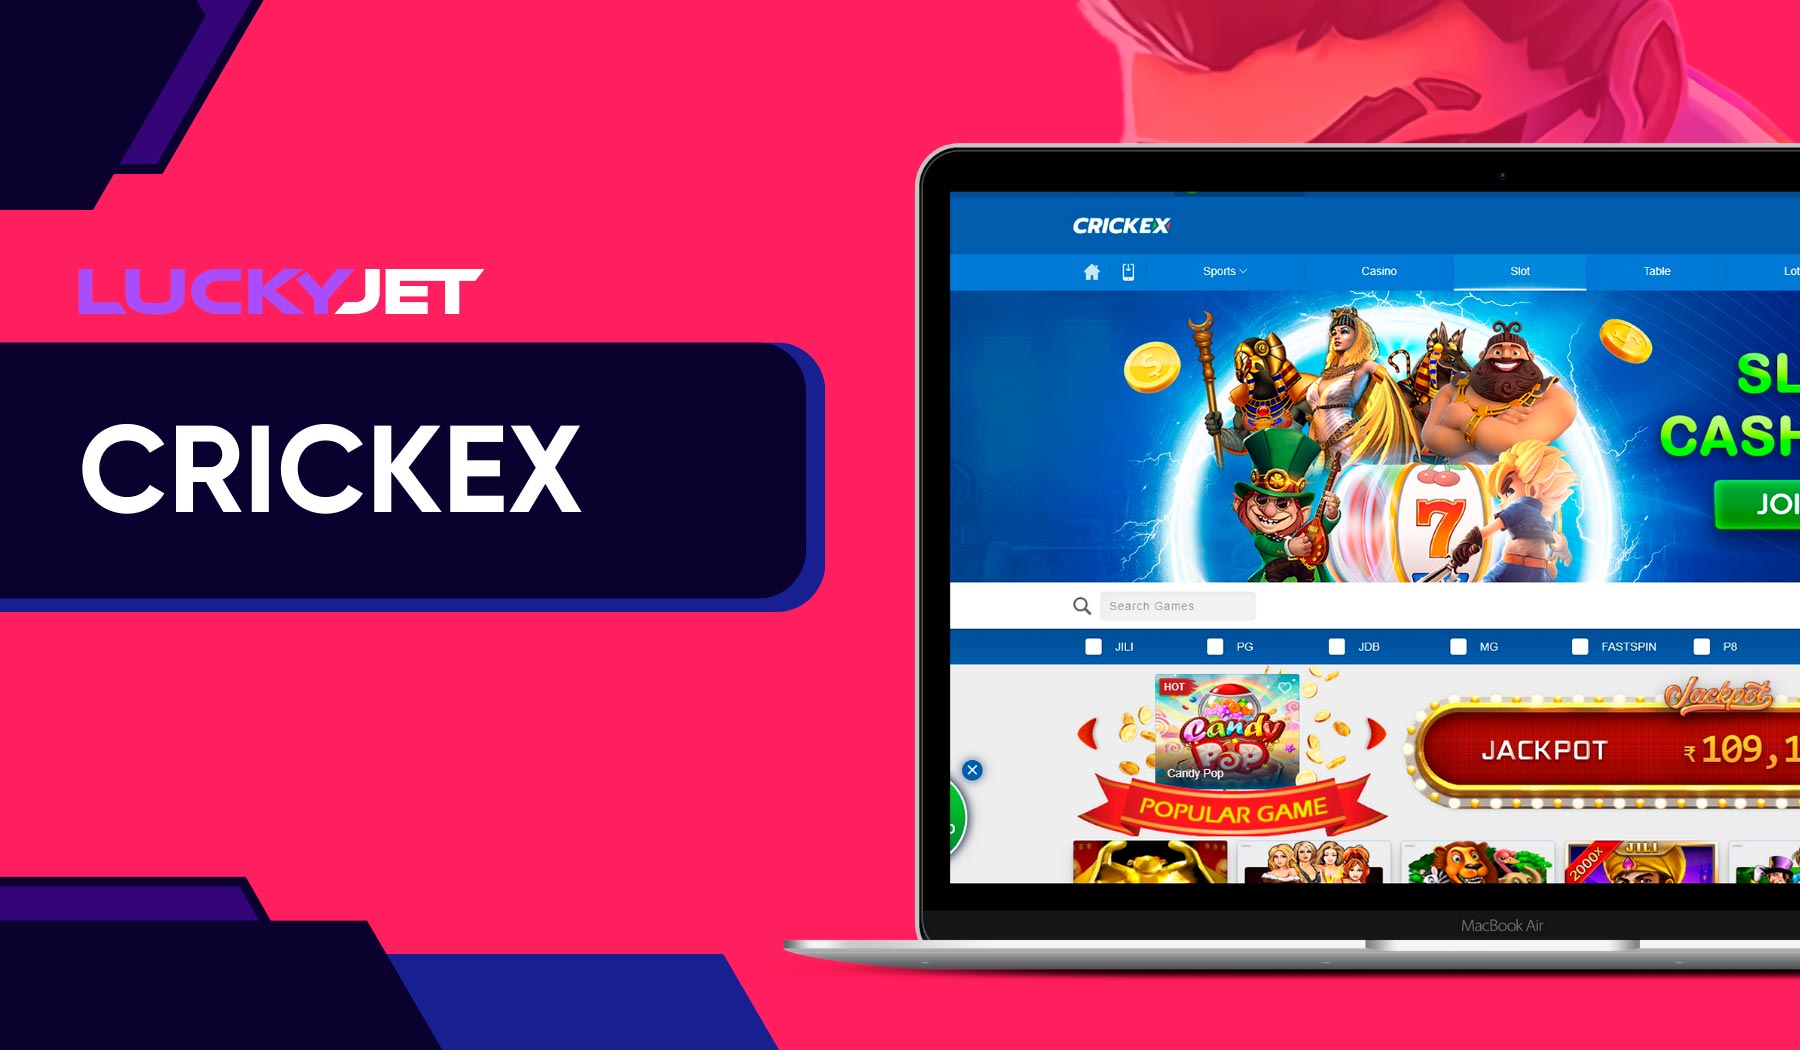 Crickex Lucky Jet is a game specially designed for Indian players